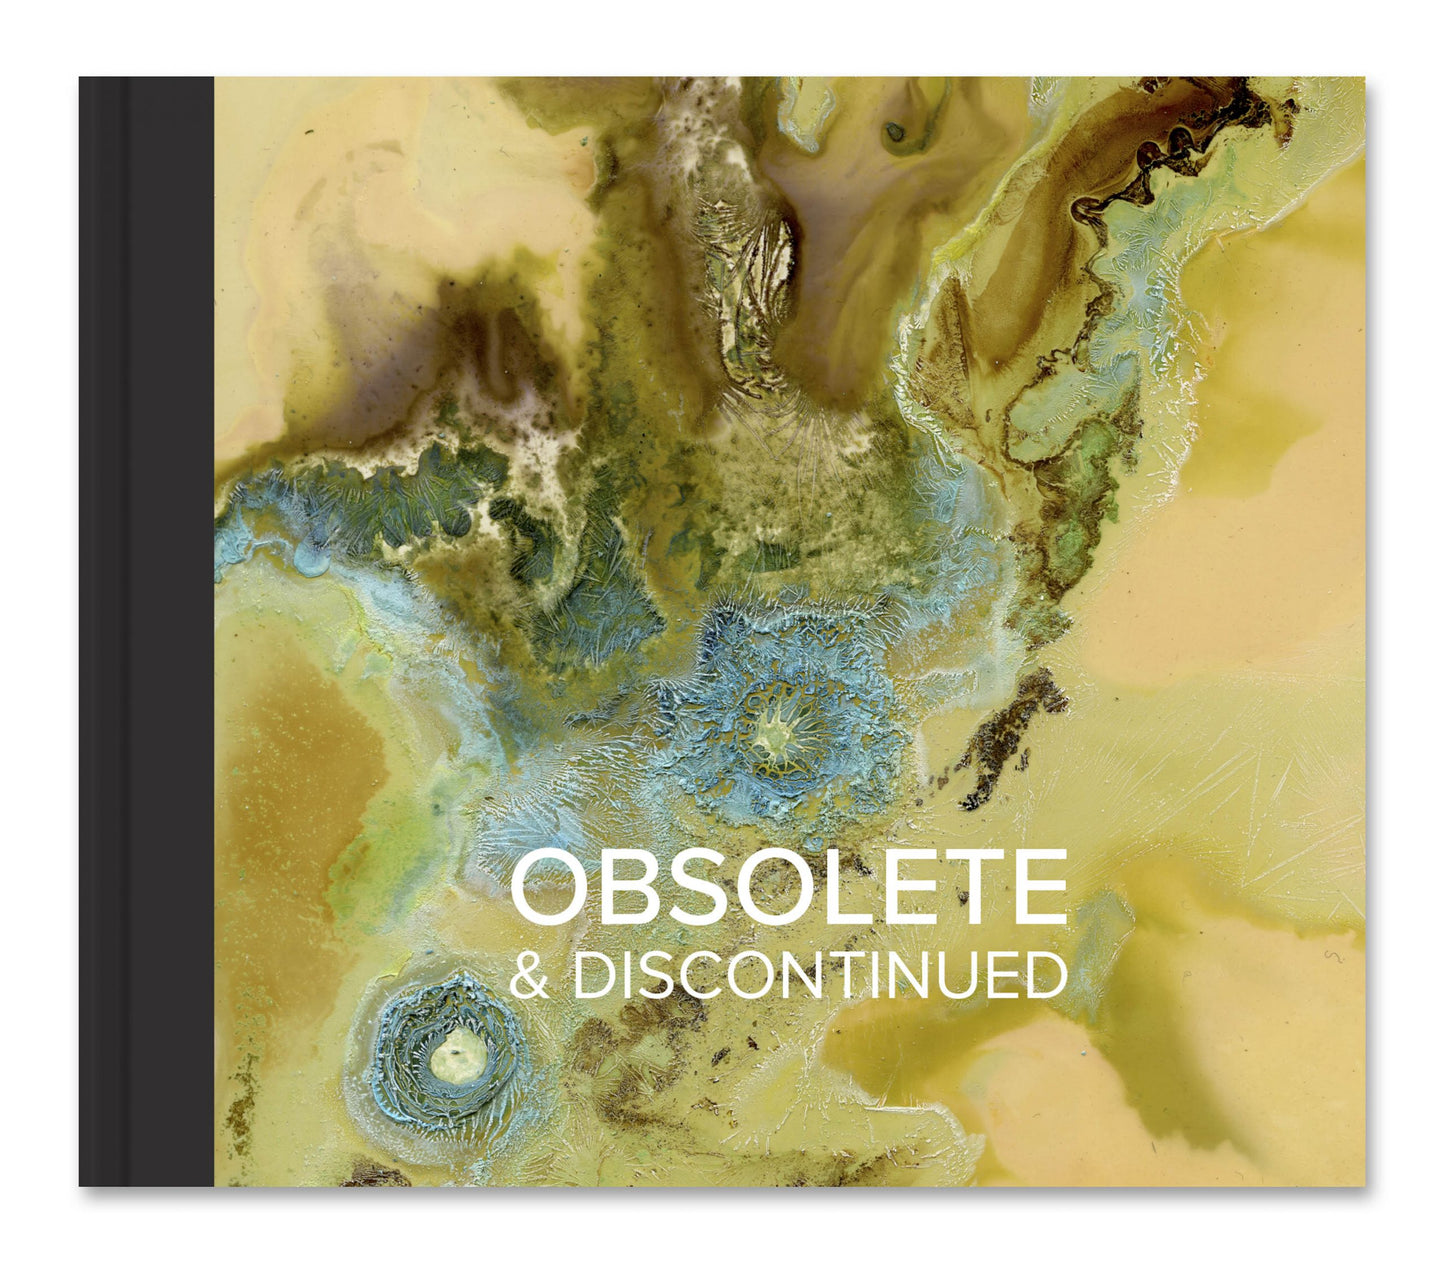 Mike Crawford / Obsolete & Discontinued